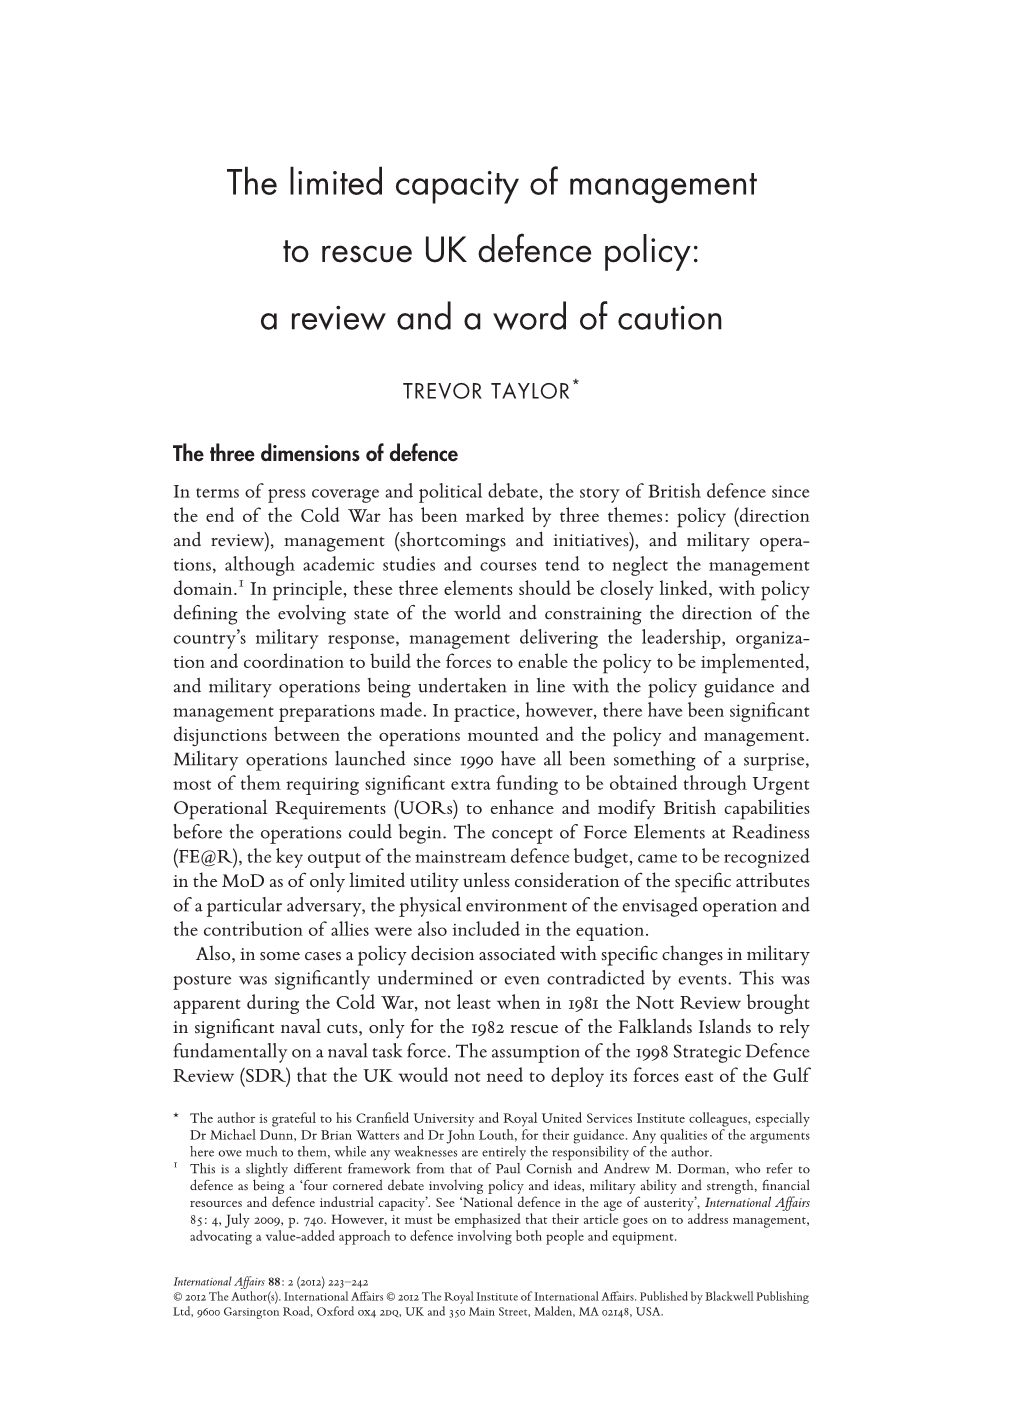 The Limited Capacity of Management to Rescue UK Defence Policy: a Review and a Word of Caution